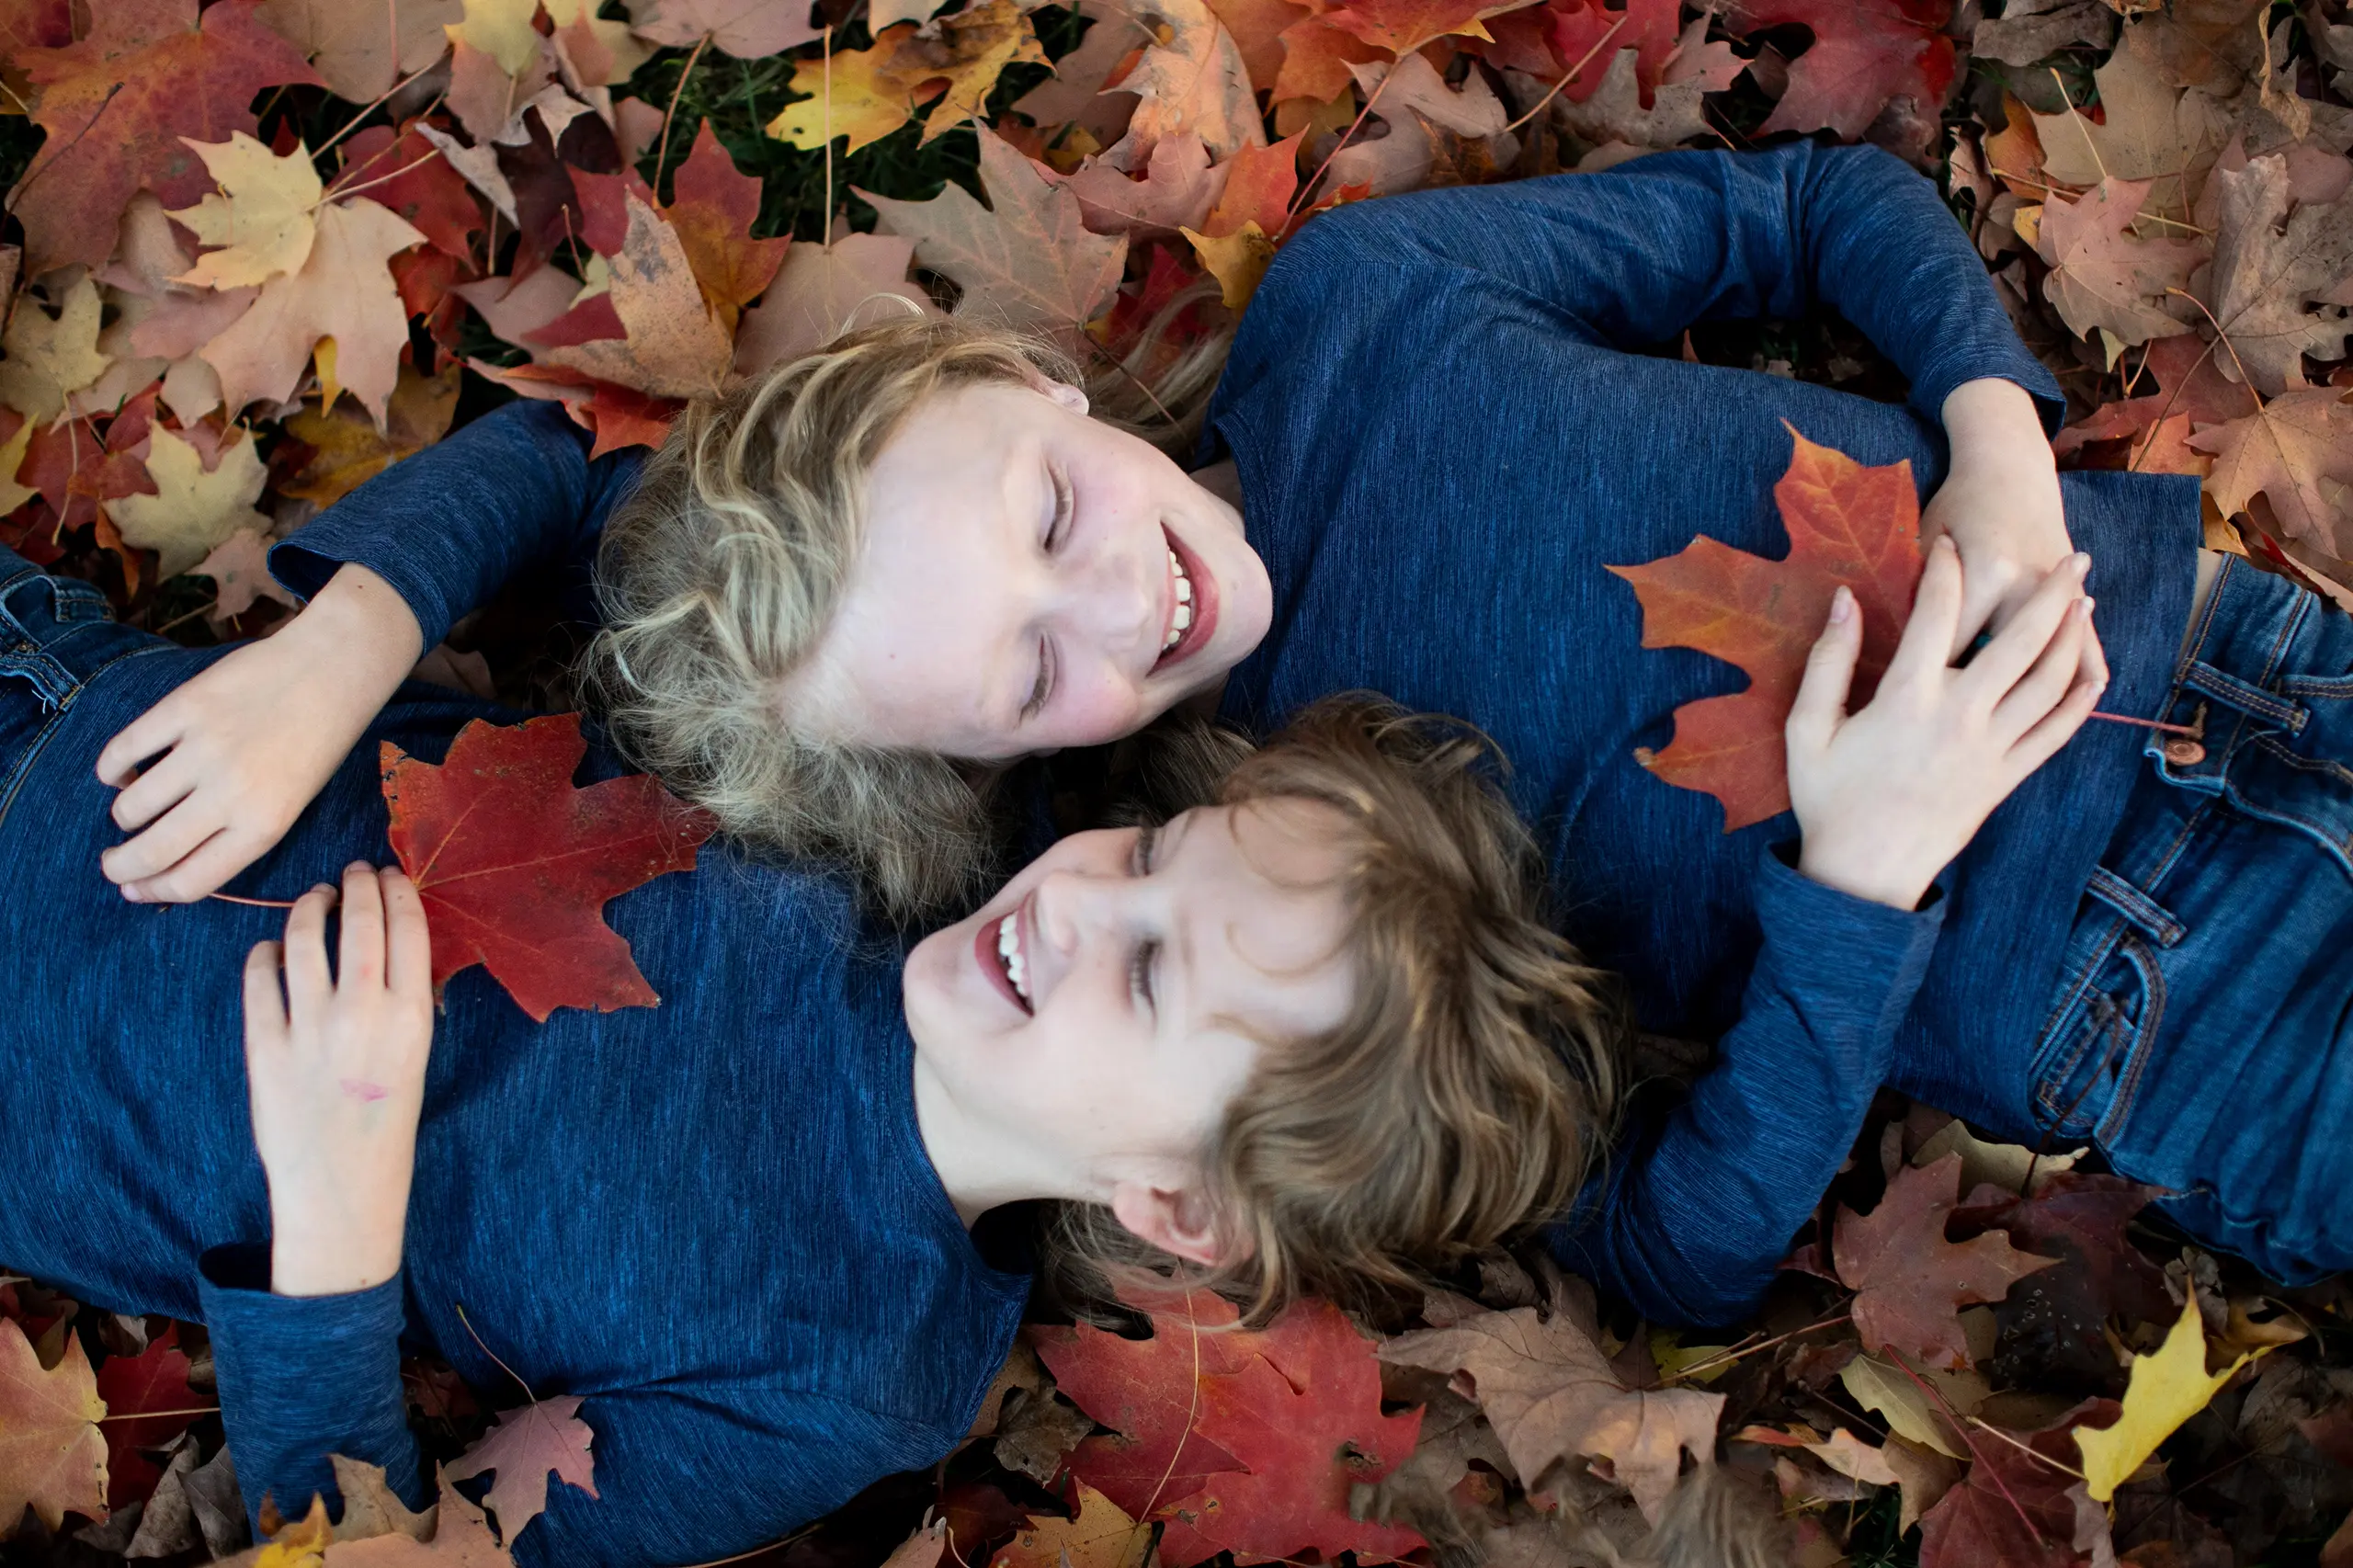 Two girls playing in fallen leaves in autumn